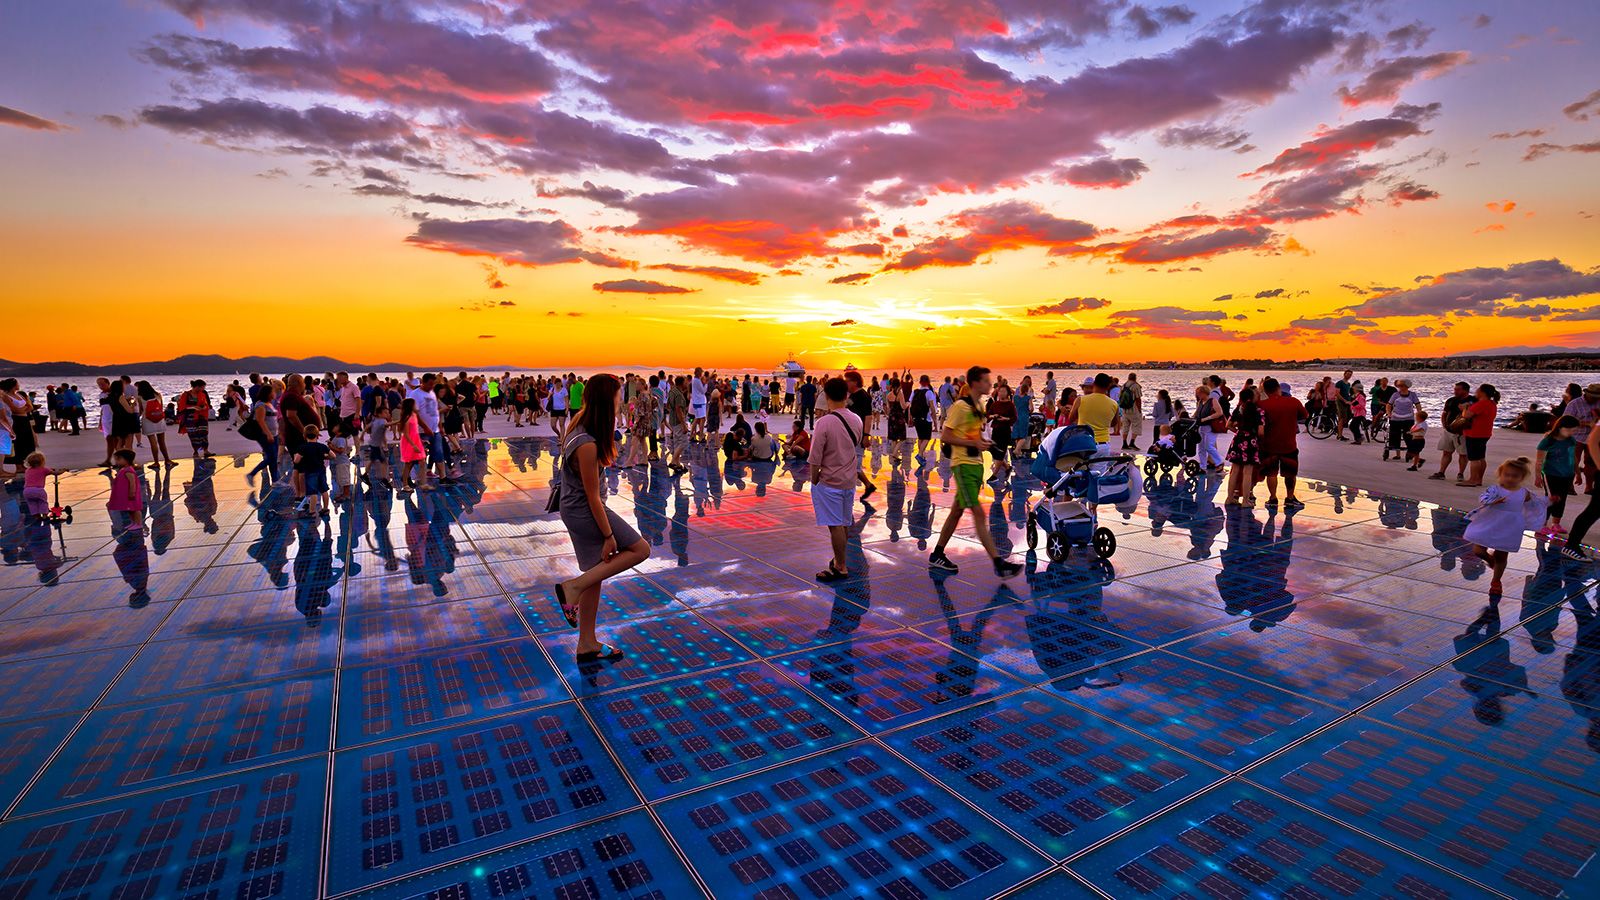 <strong>Zadar:</strong> Alfred Hitchcock once remarked that the coastal town of Zadar had the most beautiful sunset he'd ever seen. And there is something special about the city at dusk as lights twinkle  around the harbor and the old town's cafes and bars spring to life.